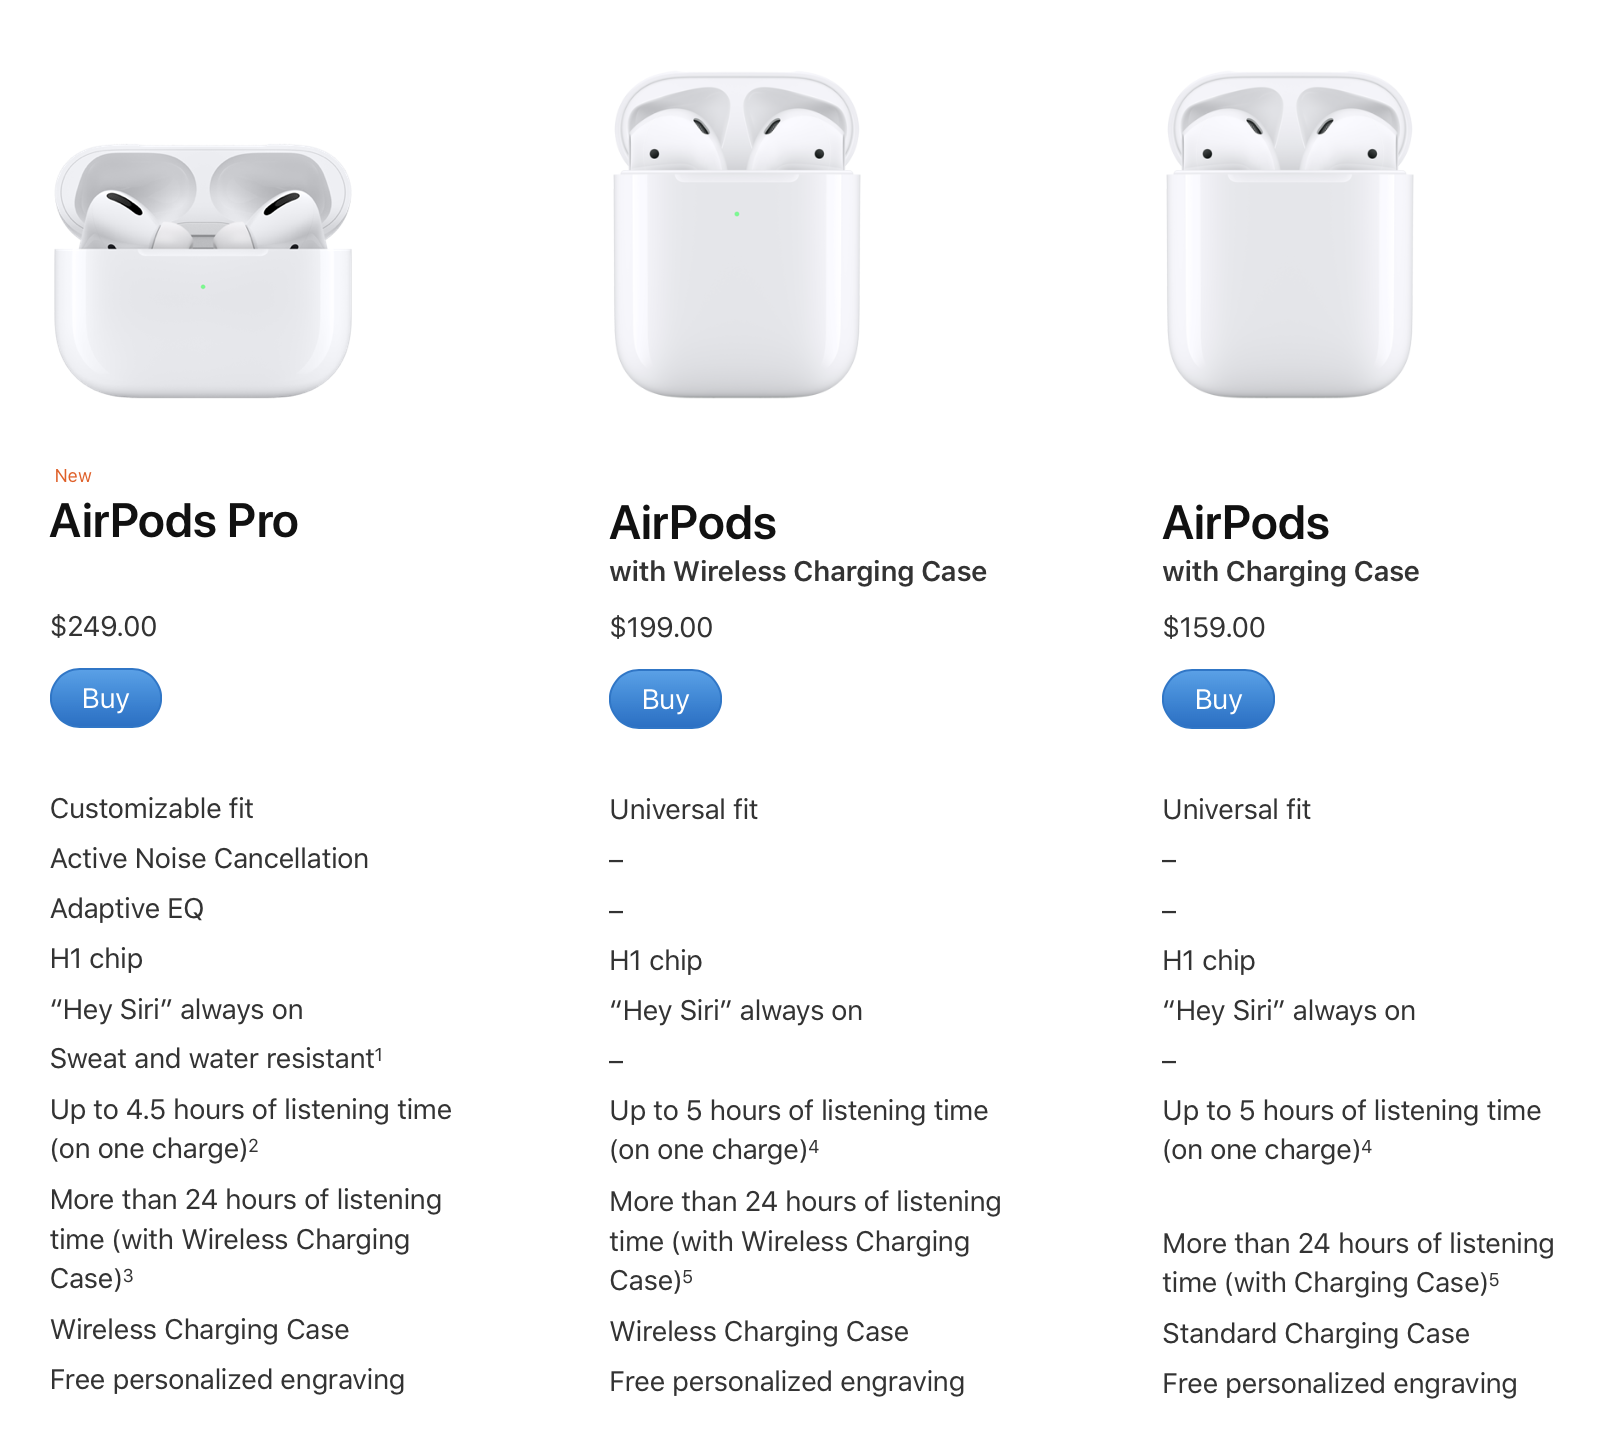 AirPods and AirPods Pro News, Features, Reviews, Pricing, etc 9to5Mac